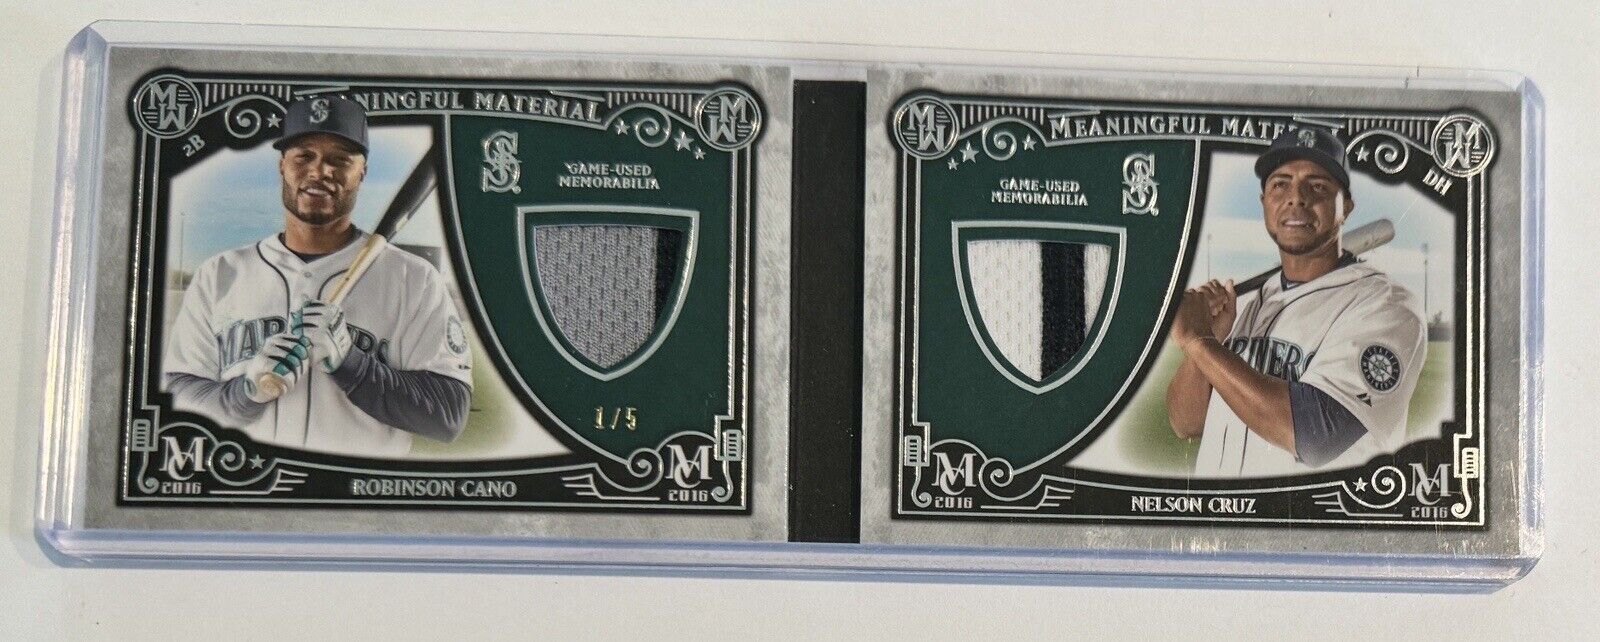 2016 Topps Museum Collection DUAL PATCH RELIC ROBINSON CANO NELSON CRUZ (1/5)